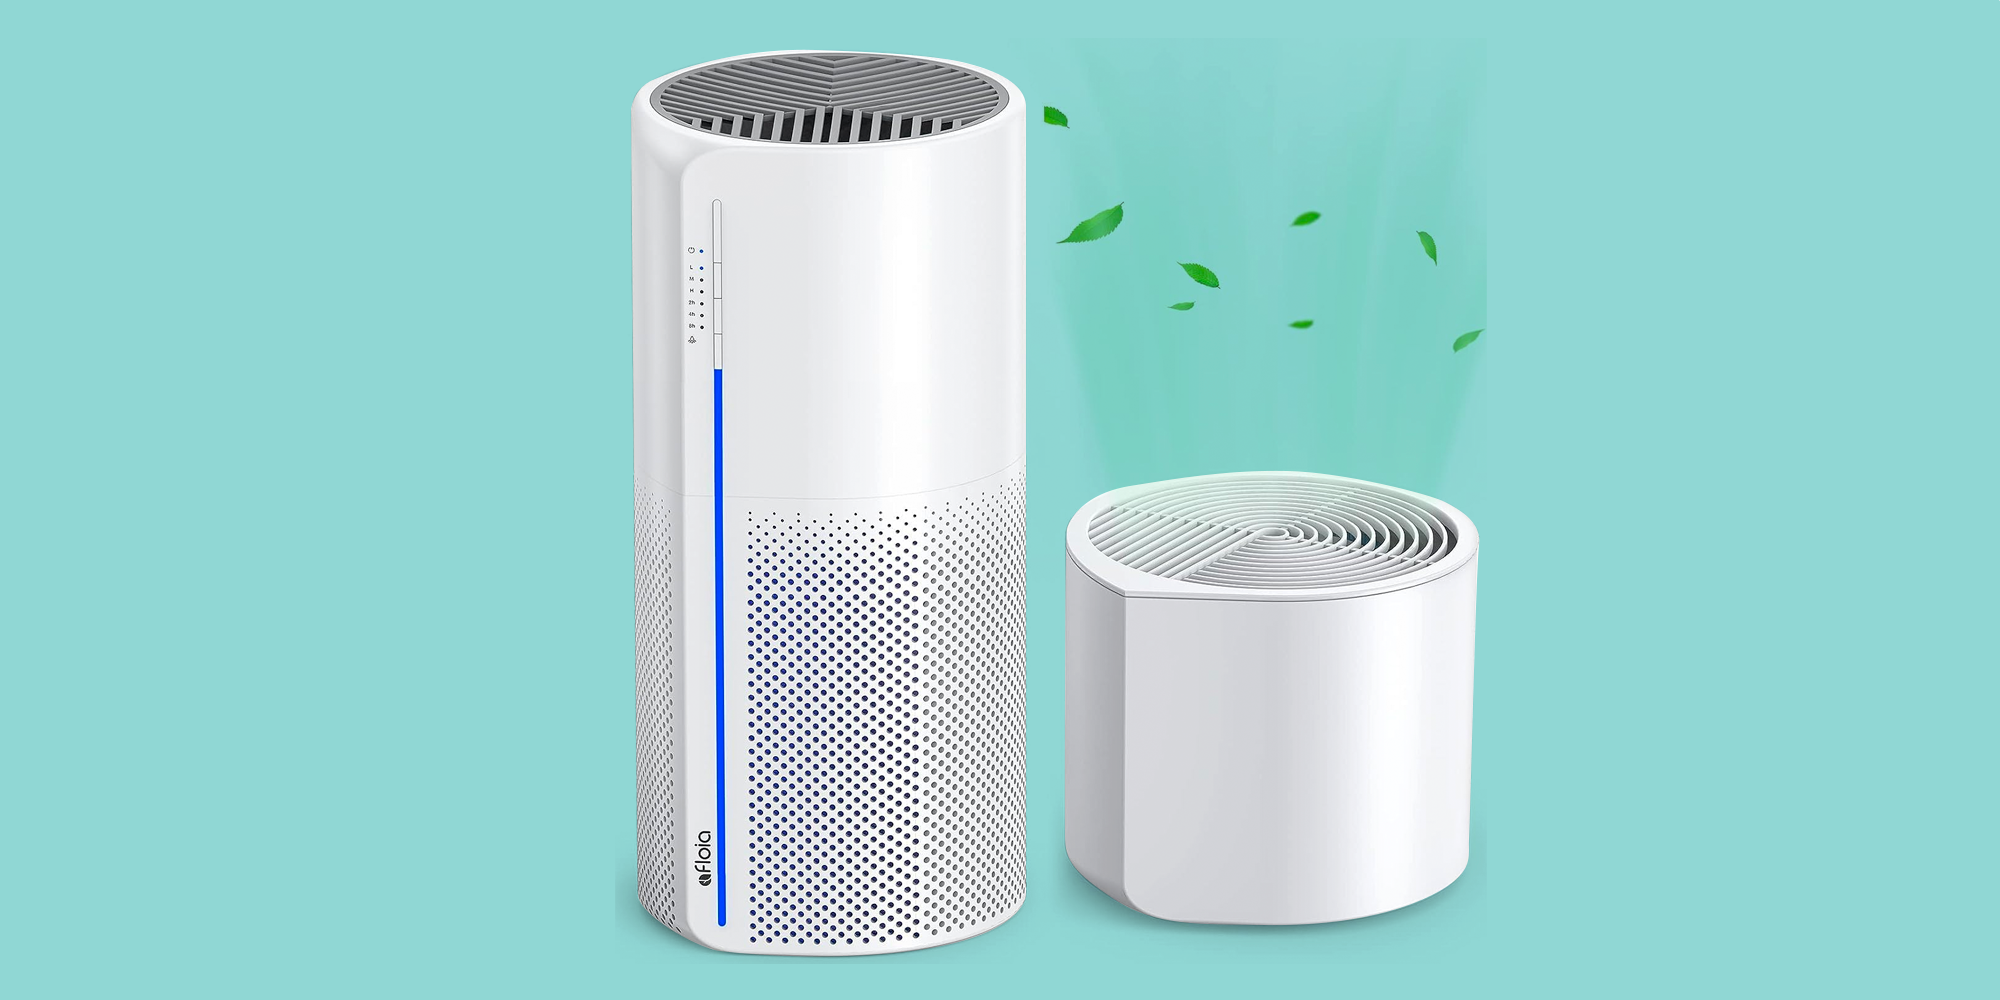 Overcoming Pet Cat Hair: Finest Tiny Air Purifiers for a Breath of Fresh Air thumbnail